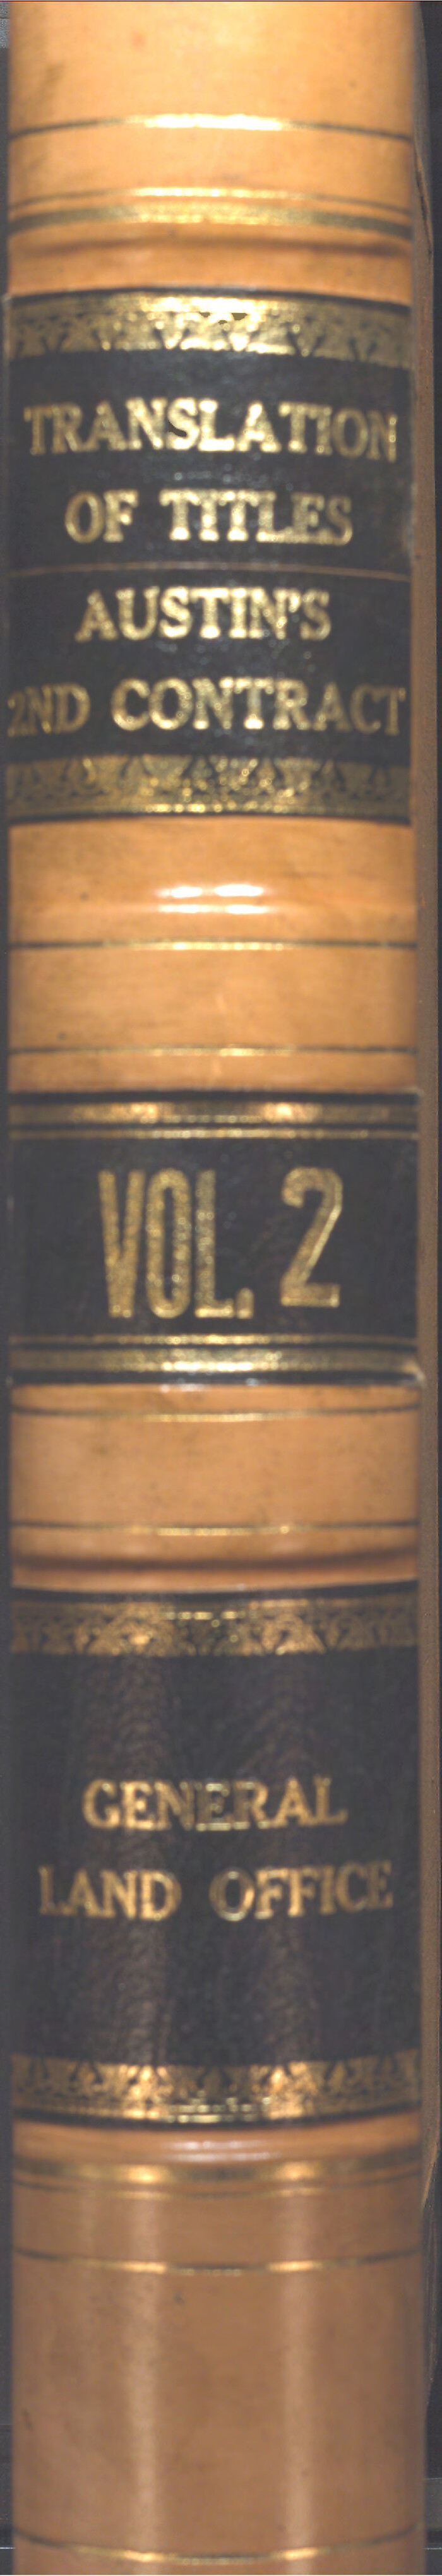 94547, Translations of Titles - Austin's Second Contract, Vol. 2, Historical Volumes